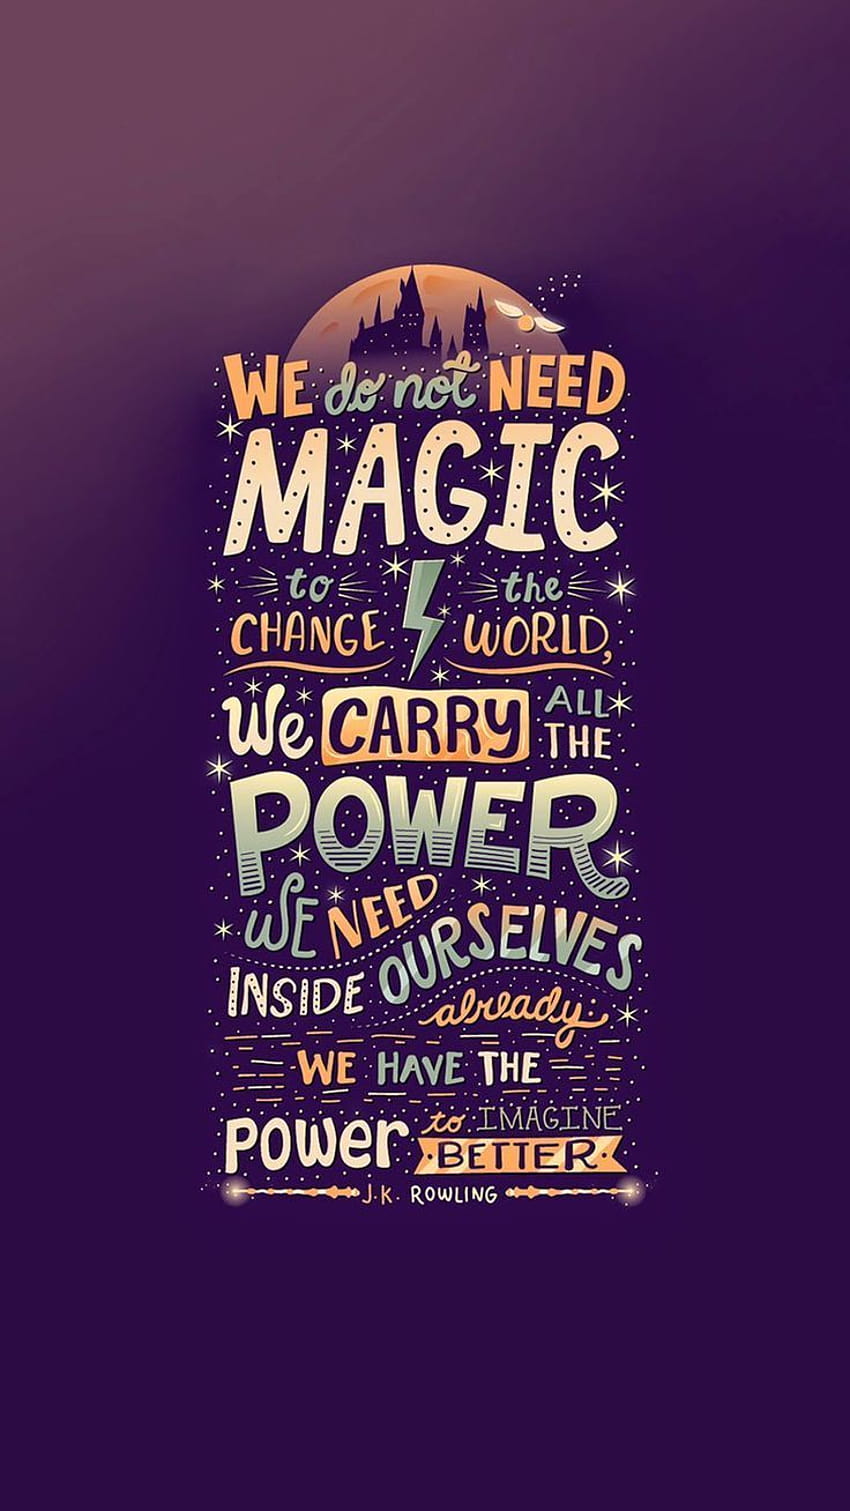 J K Rowling posted by Sarah Cunningham, nct quotes HD phone wallpaper